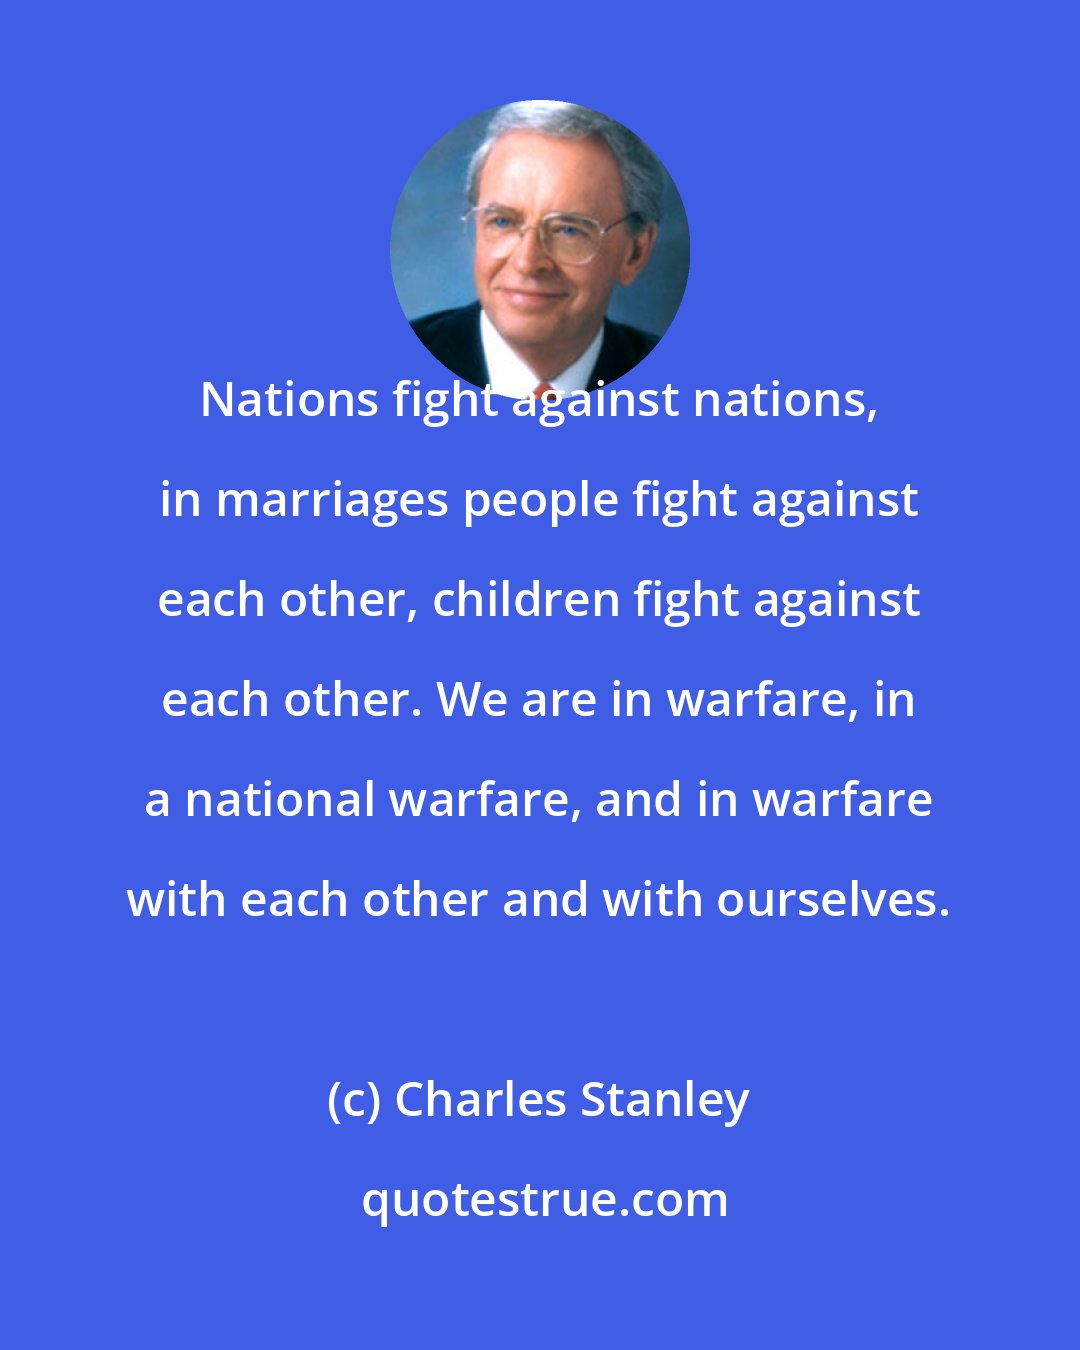 Charles Stanley: Nations fight against nations, in marriages people fight against each other, children fight against each other. We are in warfare, in a national warfare, and in warfare with each other and with ourselves.